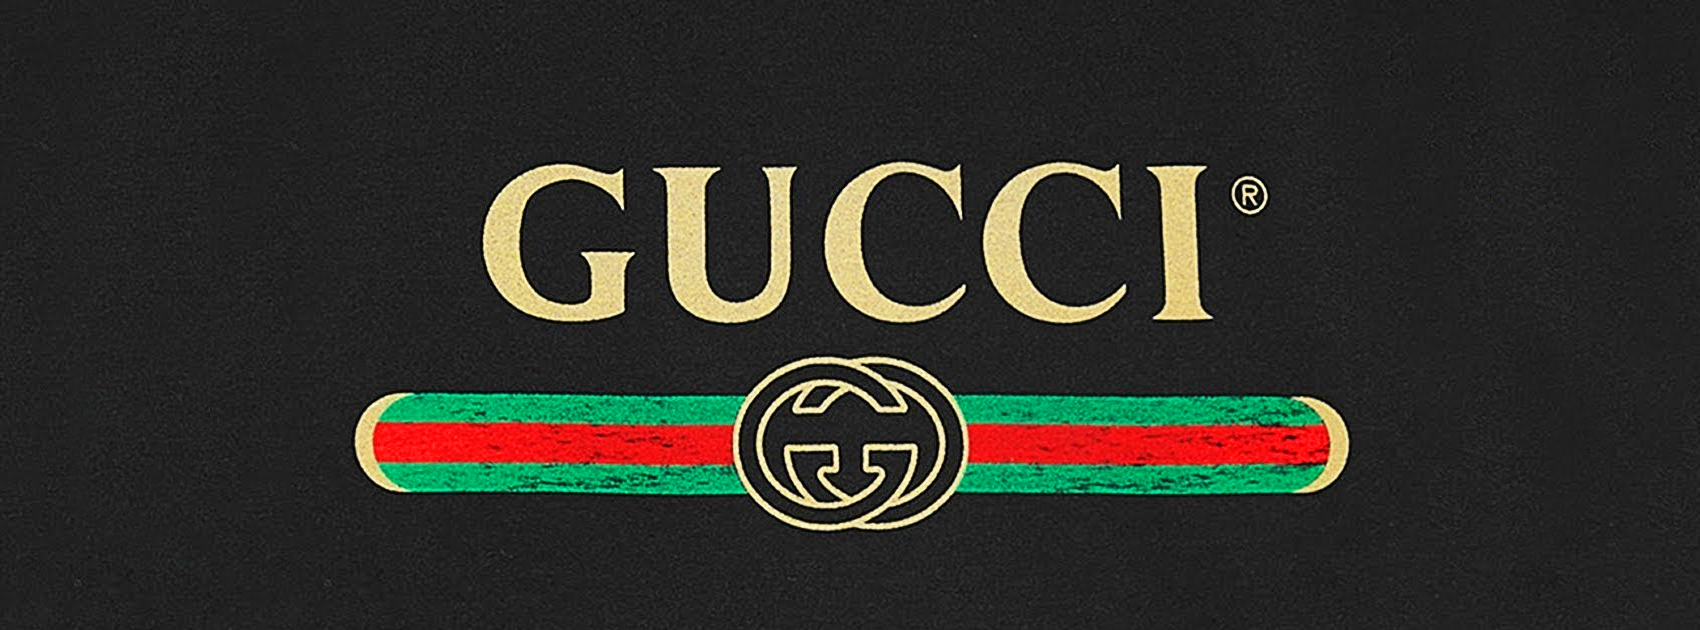 Inspiring Facts about Gucci, Interesting Facts 2019, Most Interesting Facts, Gucci Amazing Facts, Gucci Facts, Gucci Facts 2019, Gucci History and Facts, Gucci Lesser Known Facts, Gucci Success Story, Gucci Unknown Facts, startup stories, Surprising Facts About Gucci